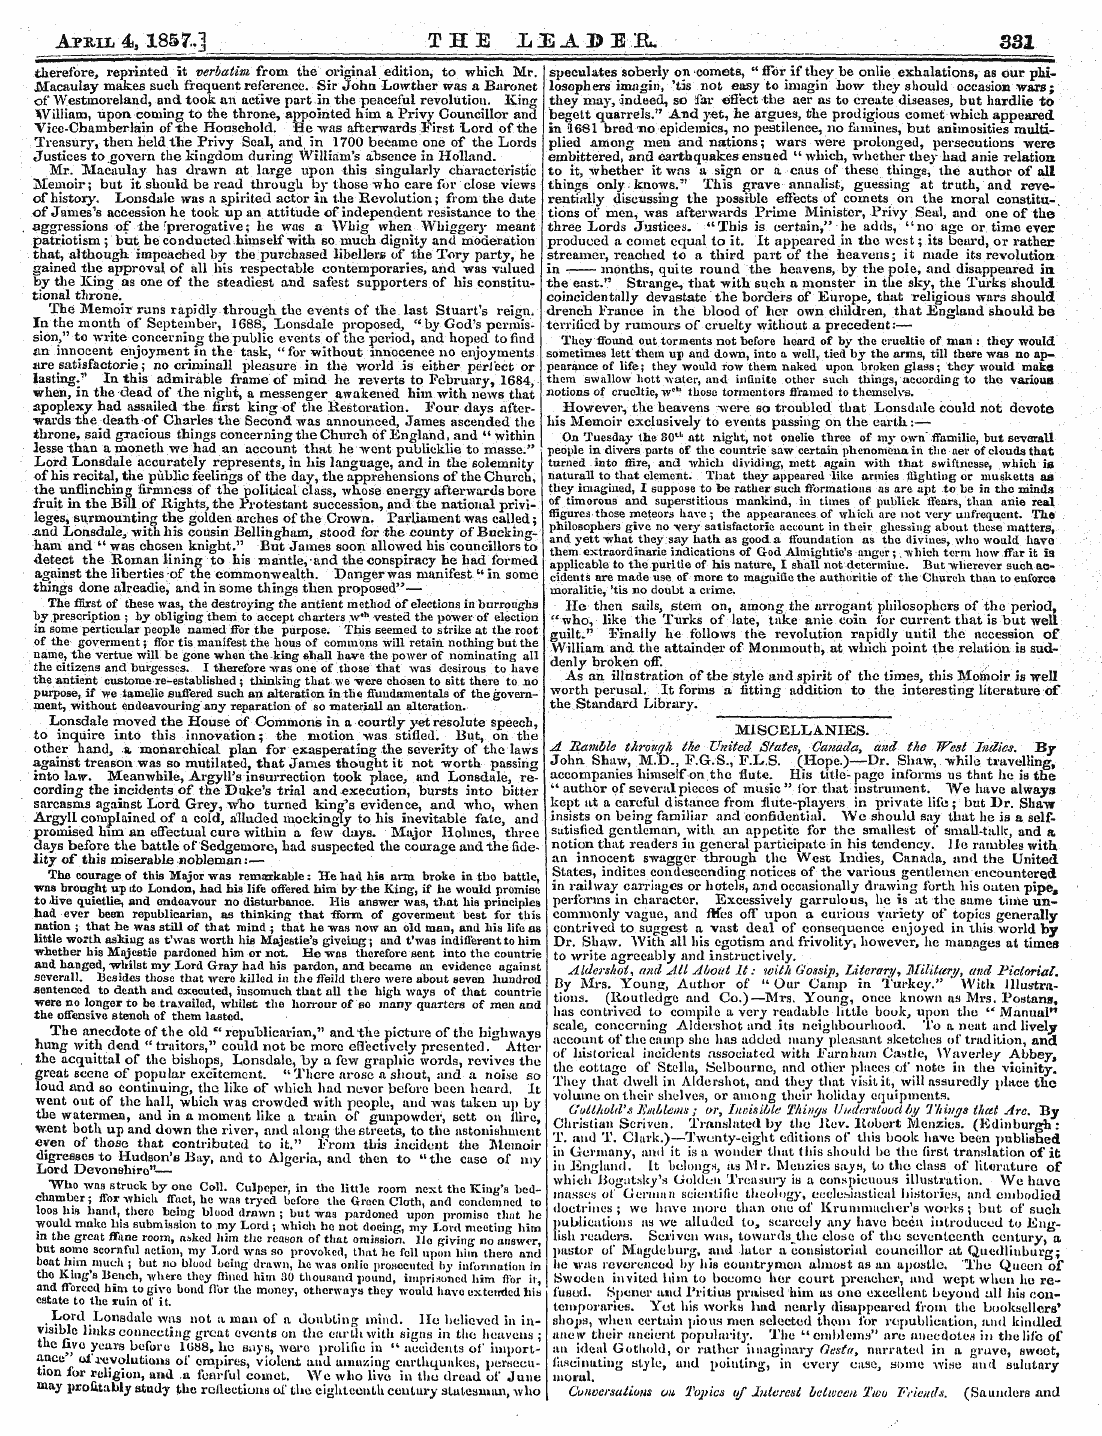 Leader (1850-1860): jS F Y, 2nd edition - April 4/1857..] The X^A^Ir. 331